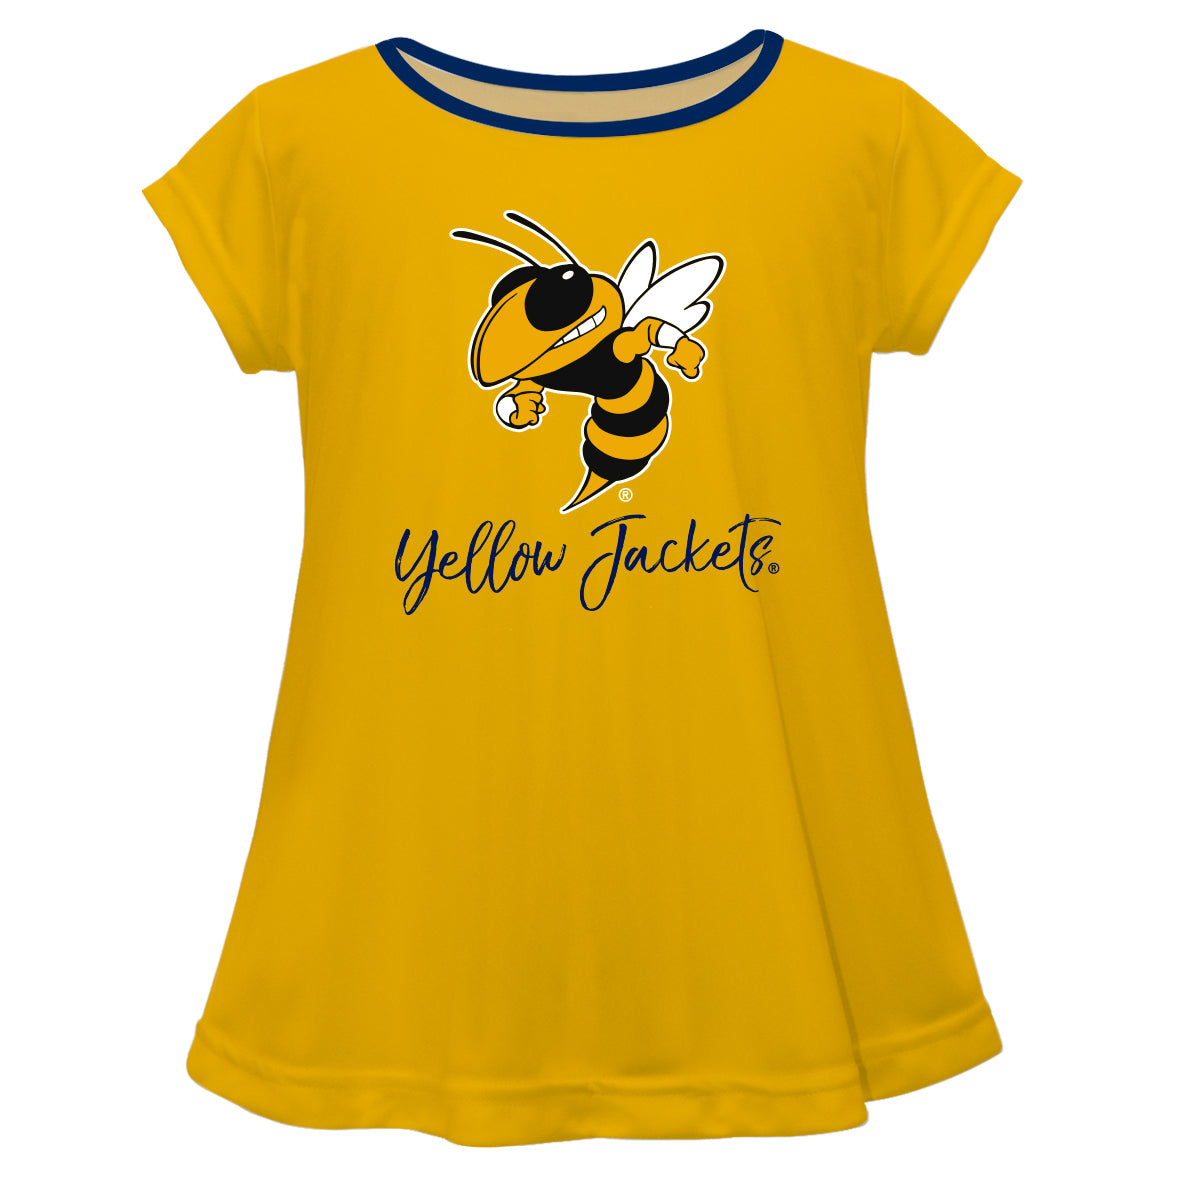 Georgia Tech Solid Yellow Girls Laurie Top Short Sleeve by Vive La Fete